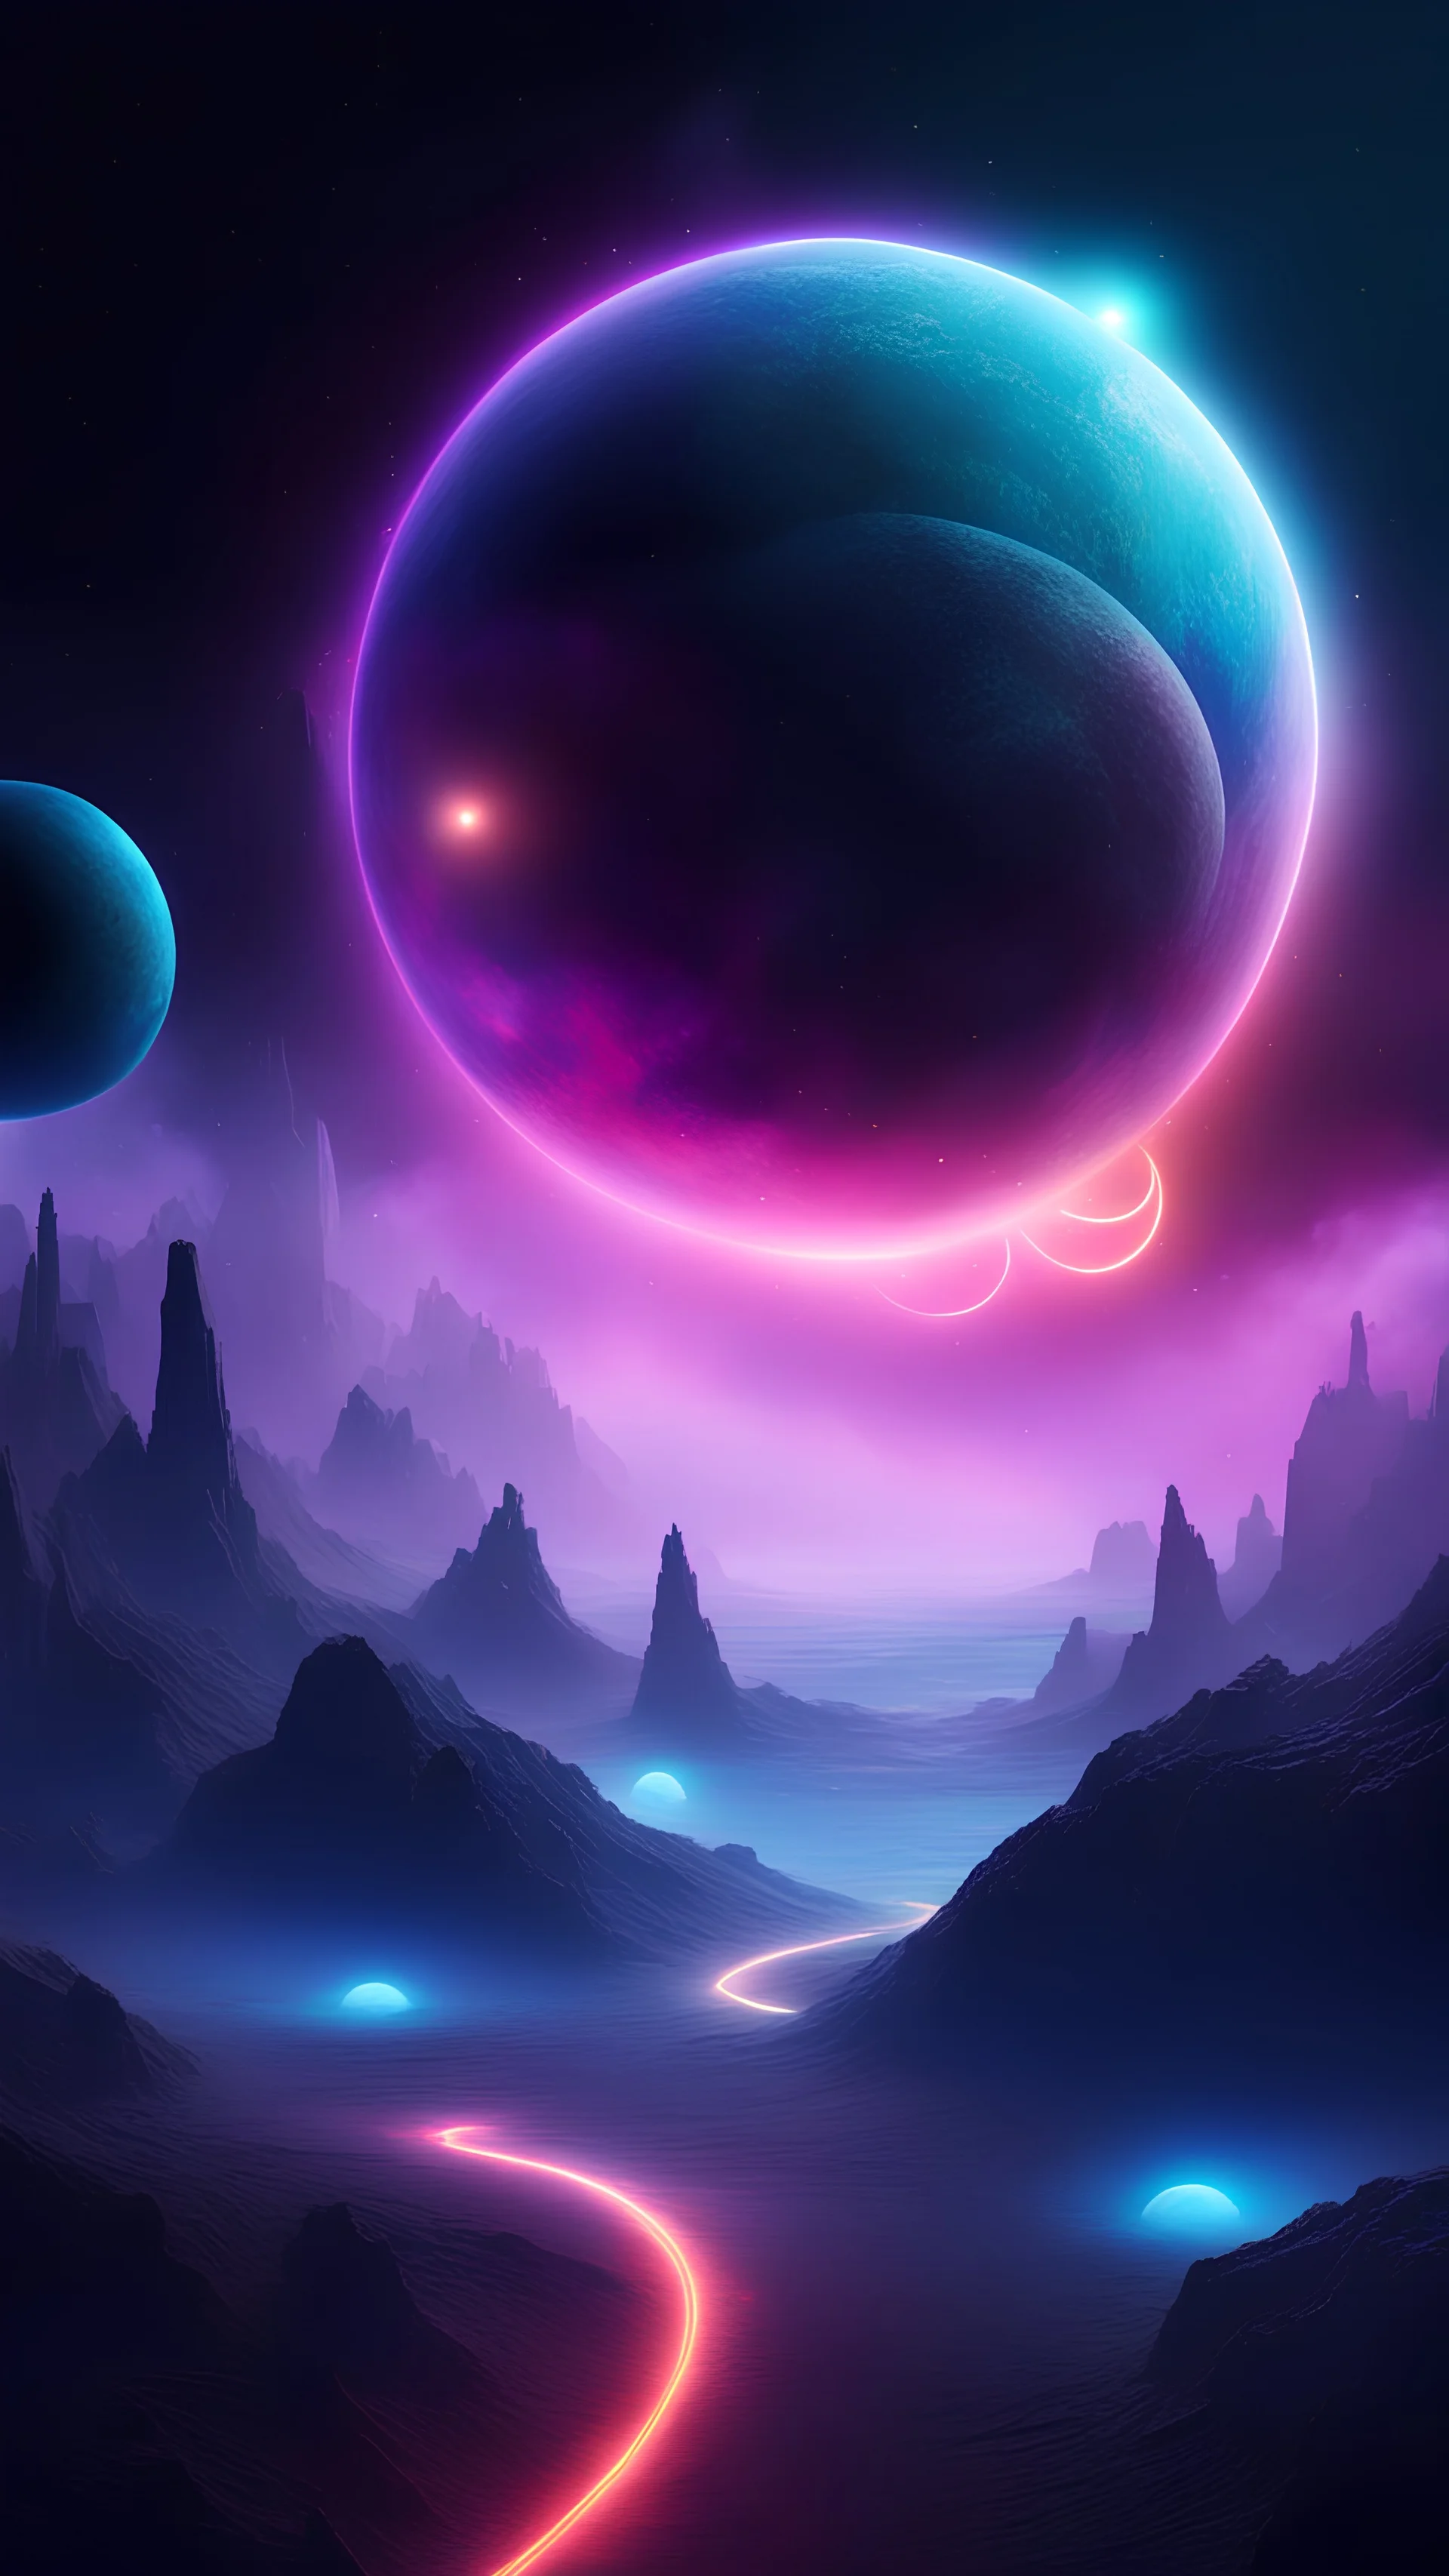 create space with multi verse planet wolrd,cinematic galaxy, neon light cosmic with motion fog at night